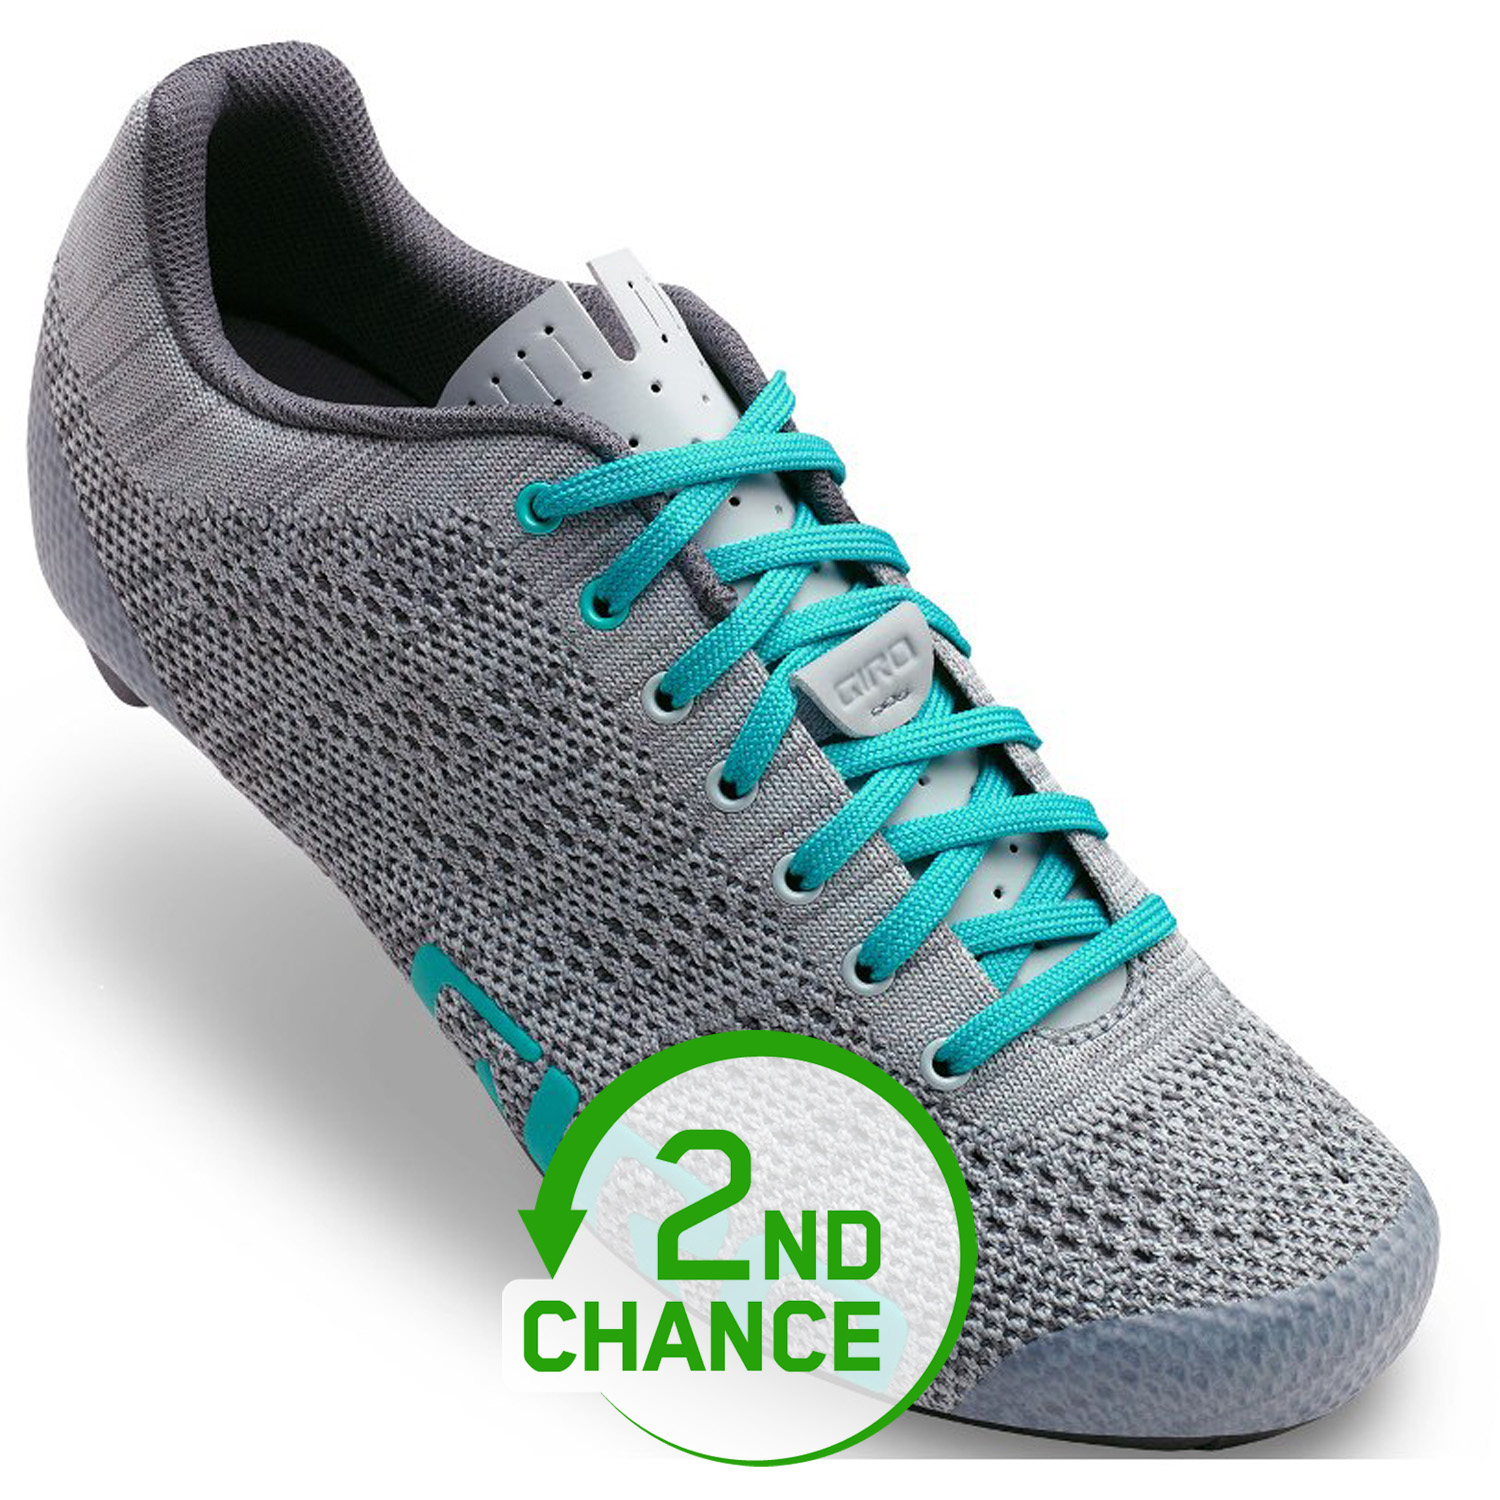 Picture of Giro Empire E70 Knit Road Shoes Women - grey/glacier - 2nd Choice